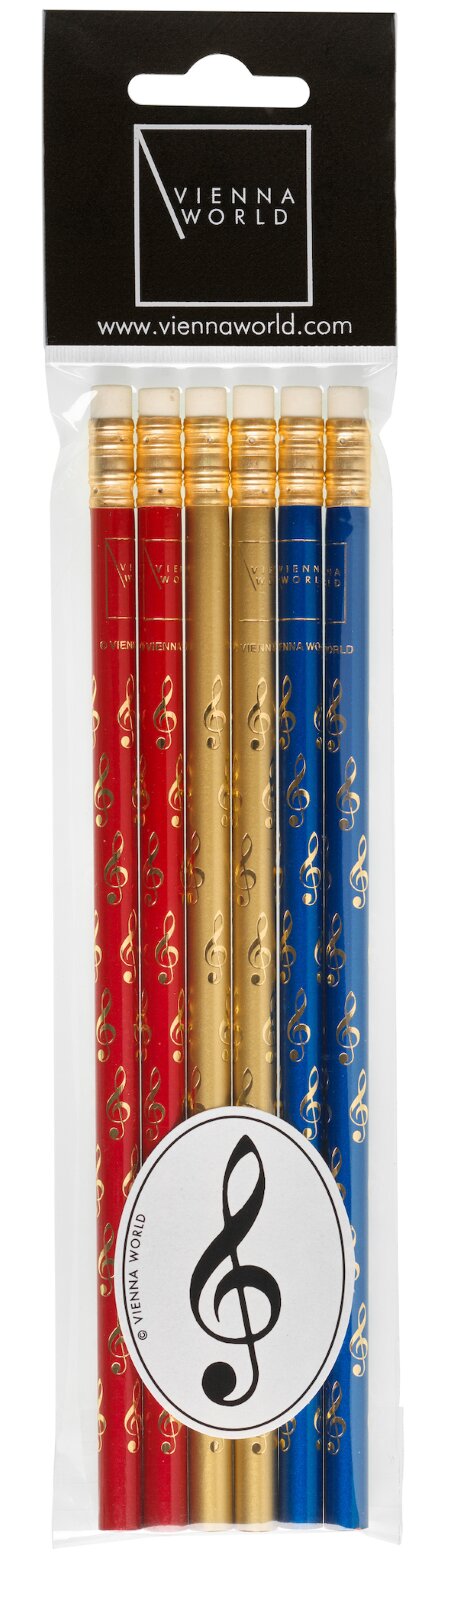 Vienna World Set 6 crayons clef de solPencil set G-clef assorted (6 pcs) red/gold/blue (6 pieces per package)    Schreibmaterial  Z 725 : photo 1